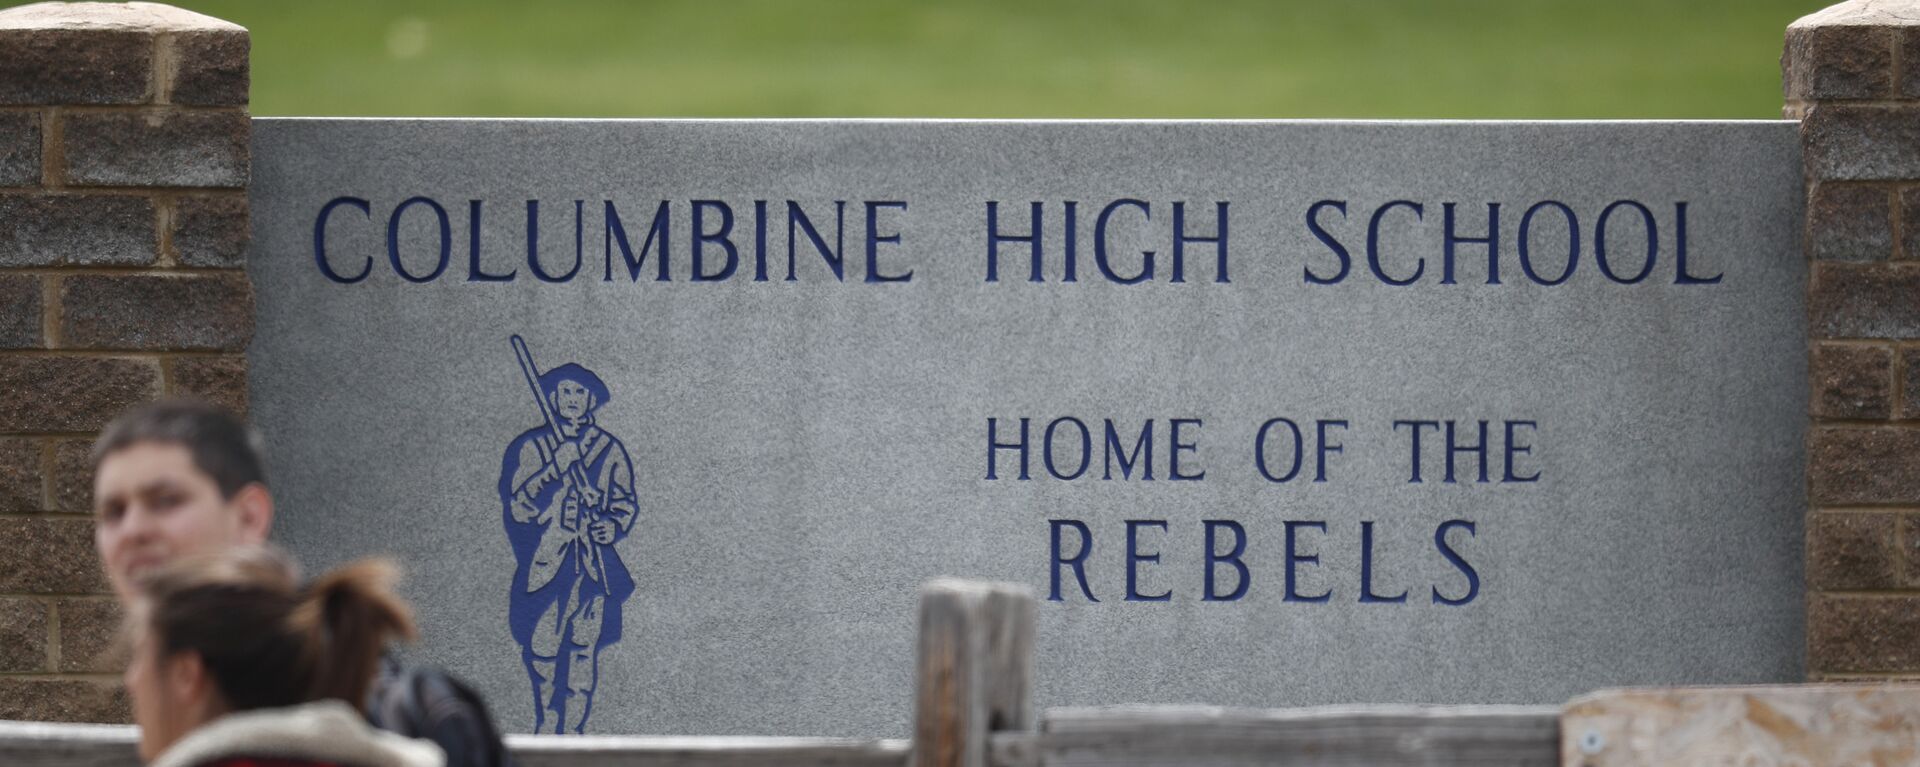 Students leave Columbine High School late Tuesday, April 16, 2019, in Littleton, Colo. Following a lockdown at Columbine High School and other Denver area schools, authorities say they are looking for a woman suspected of making threats. - Sputnik International, 1920, 10.11.2021